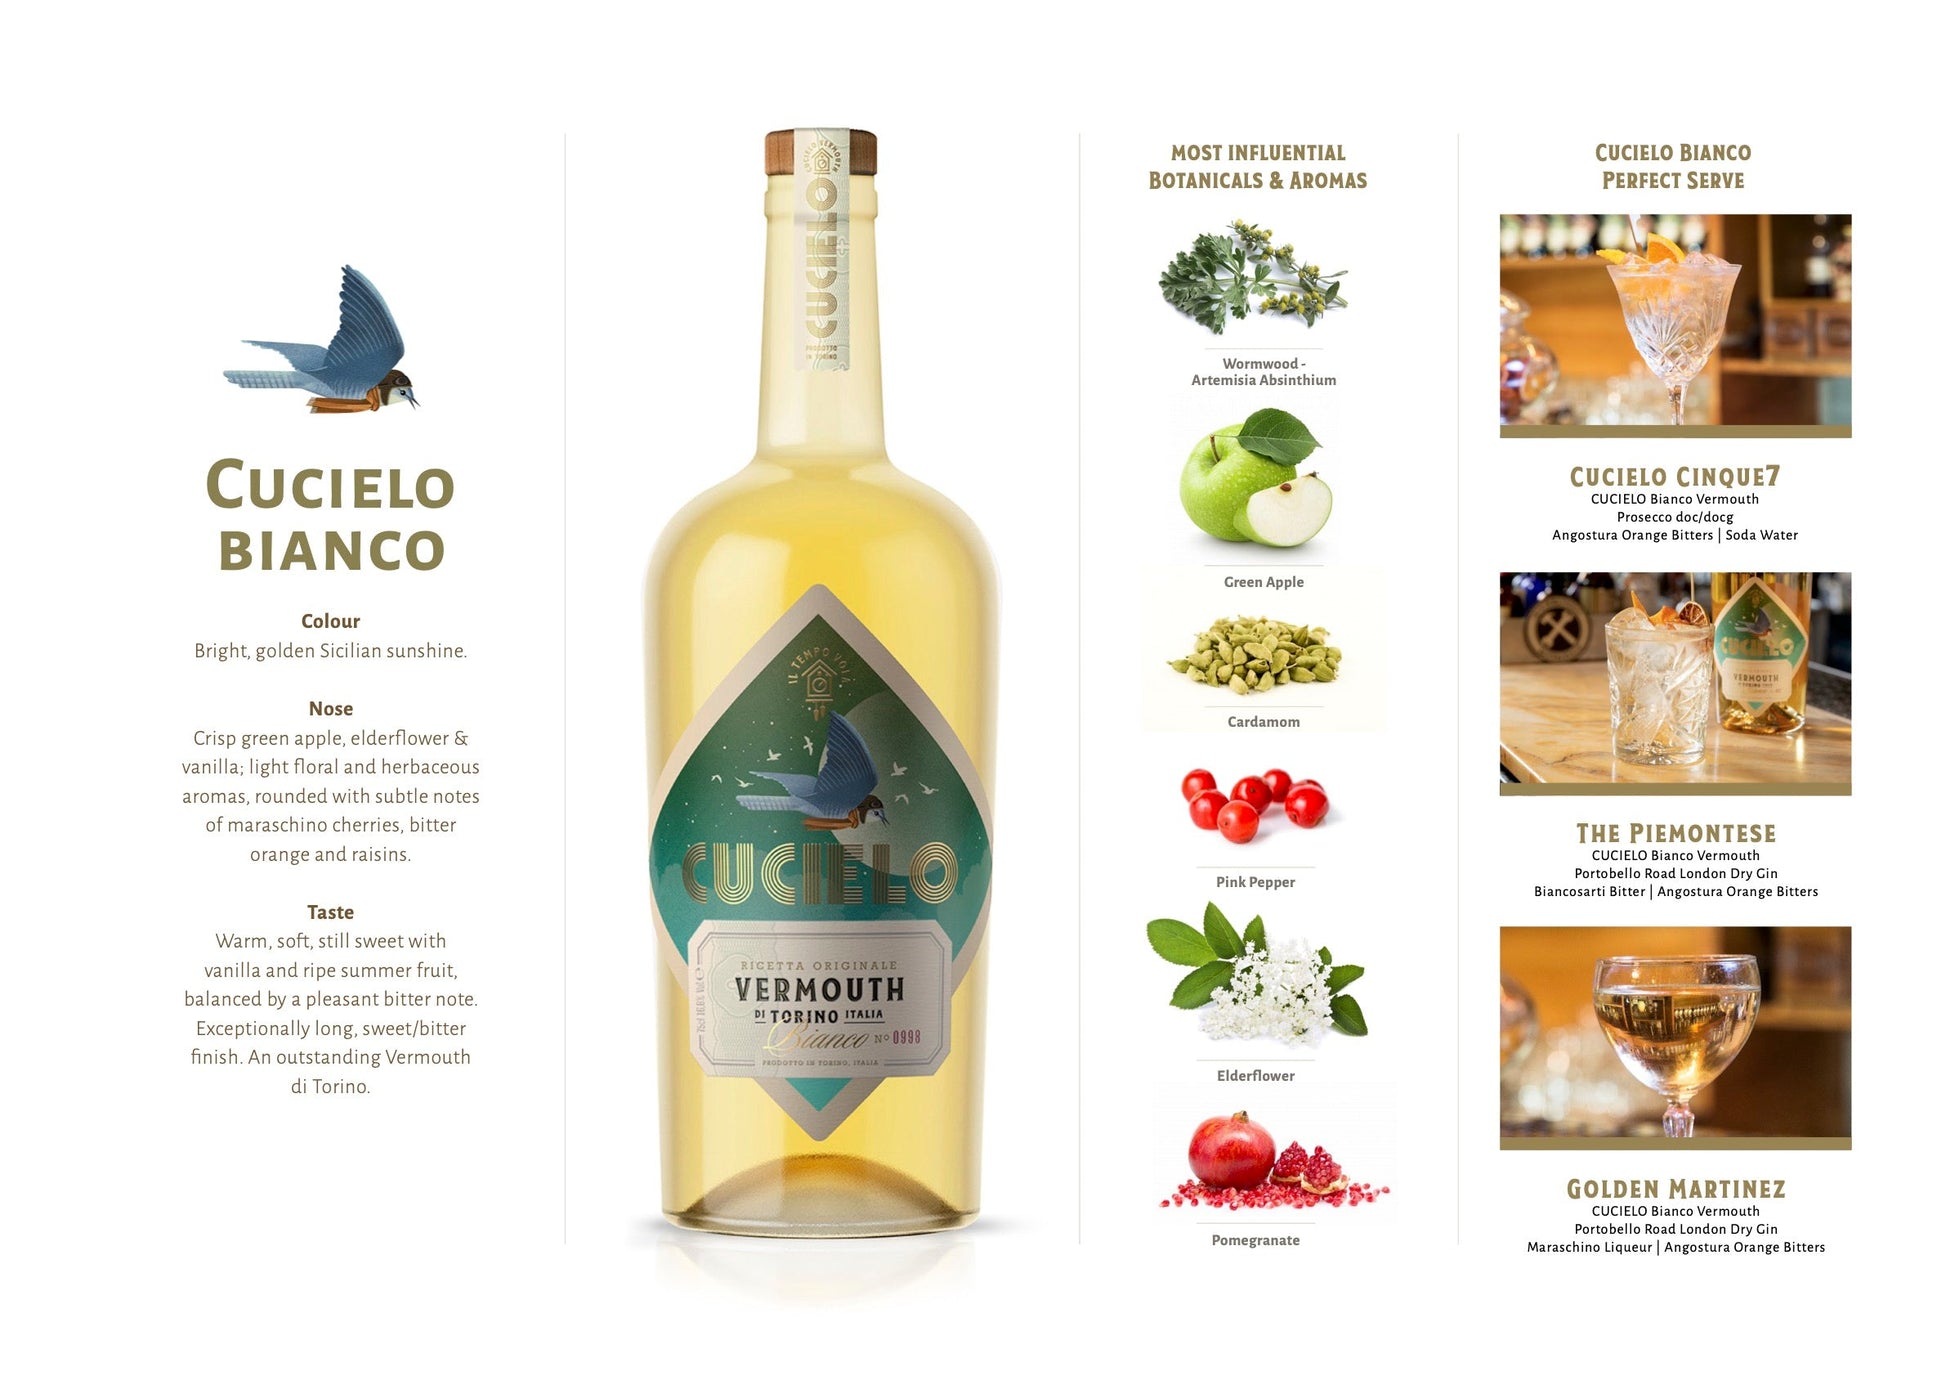 Cucielo Vermouth di Torino Bianco - Premium Vermouth from Cucielo - Shop now at Whiskery